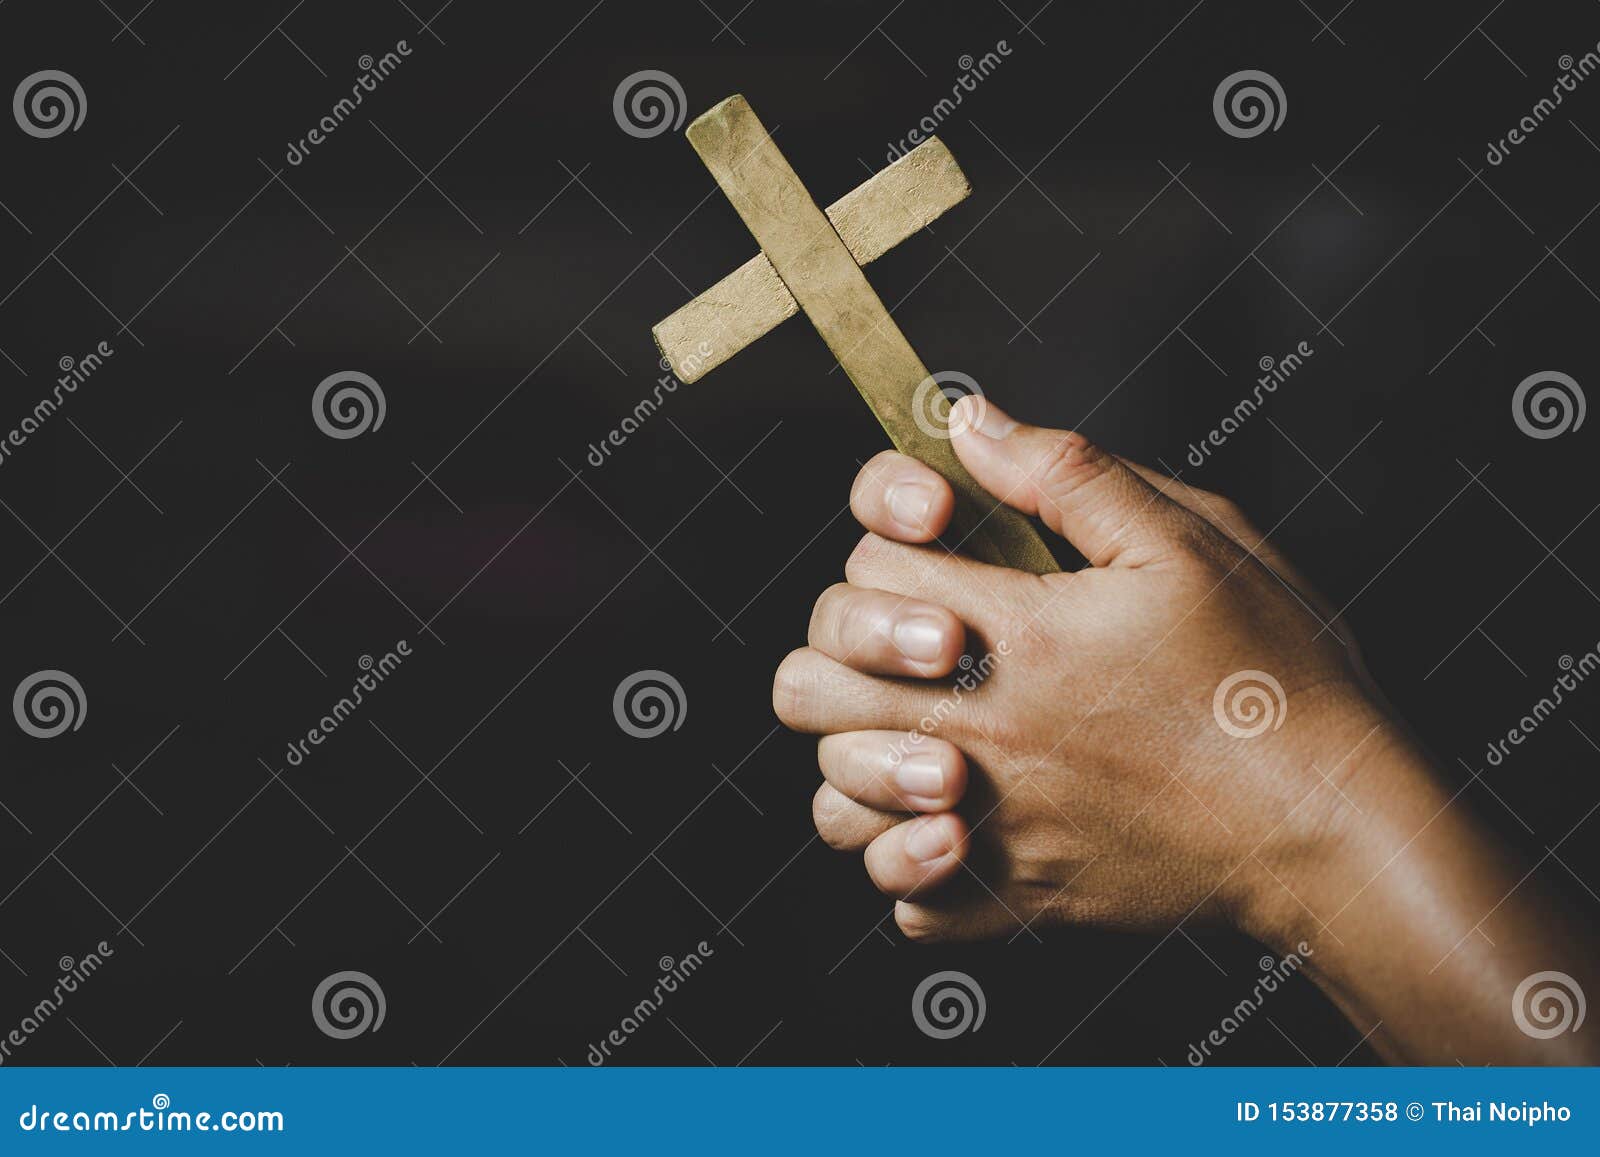 women in religious  hands praying to god while holding the cross .